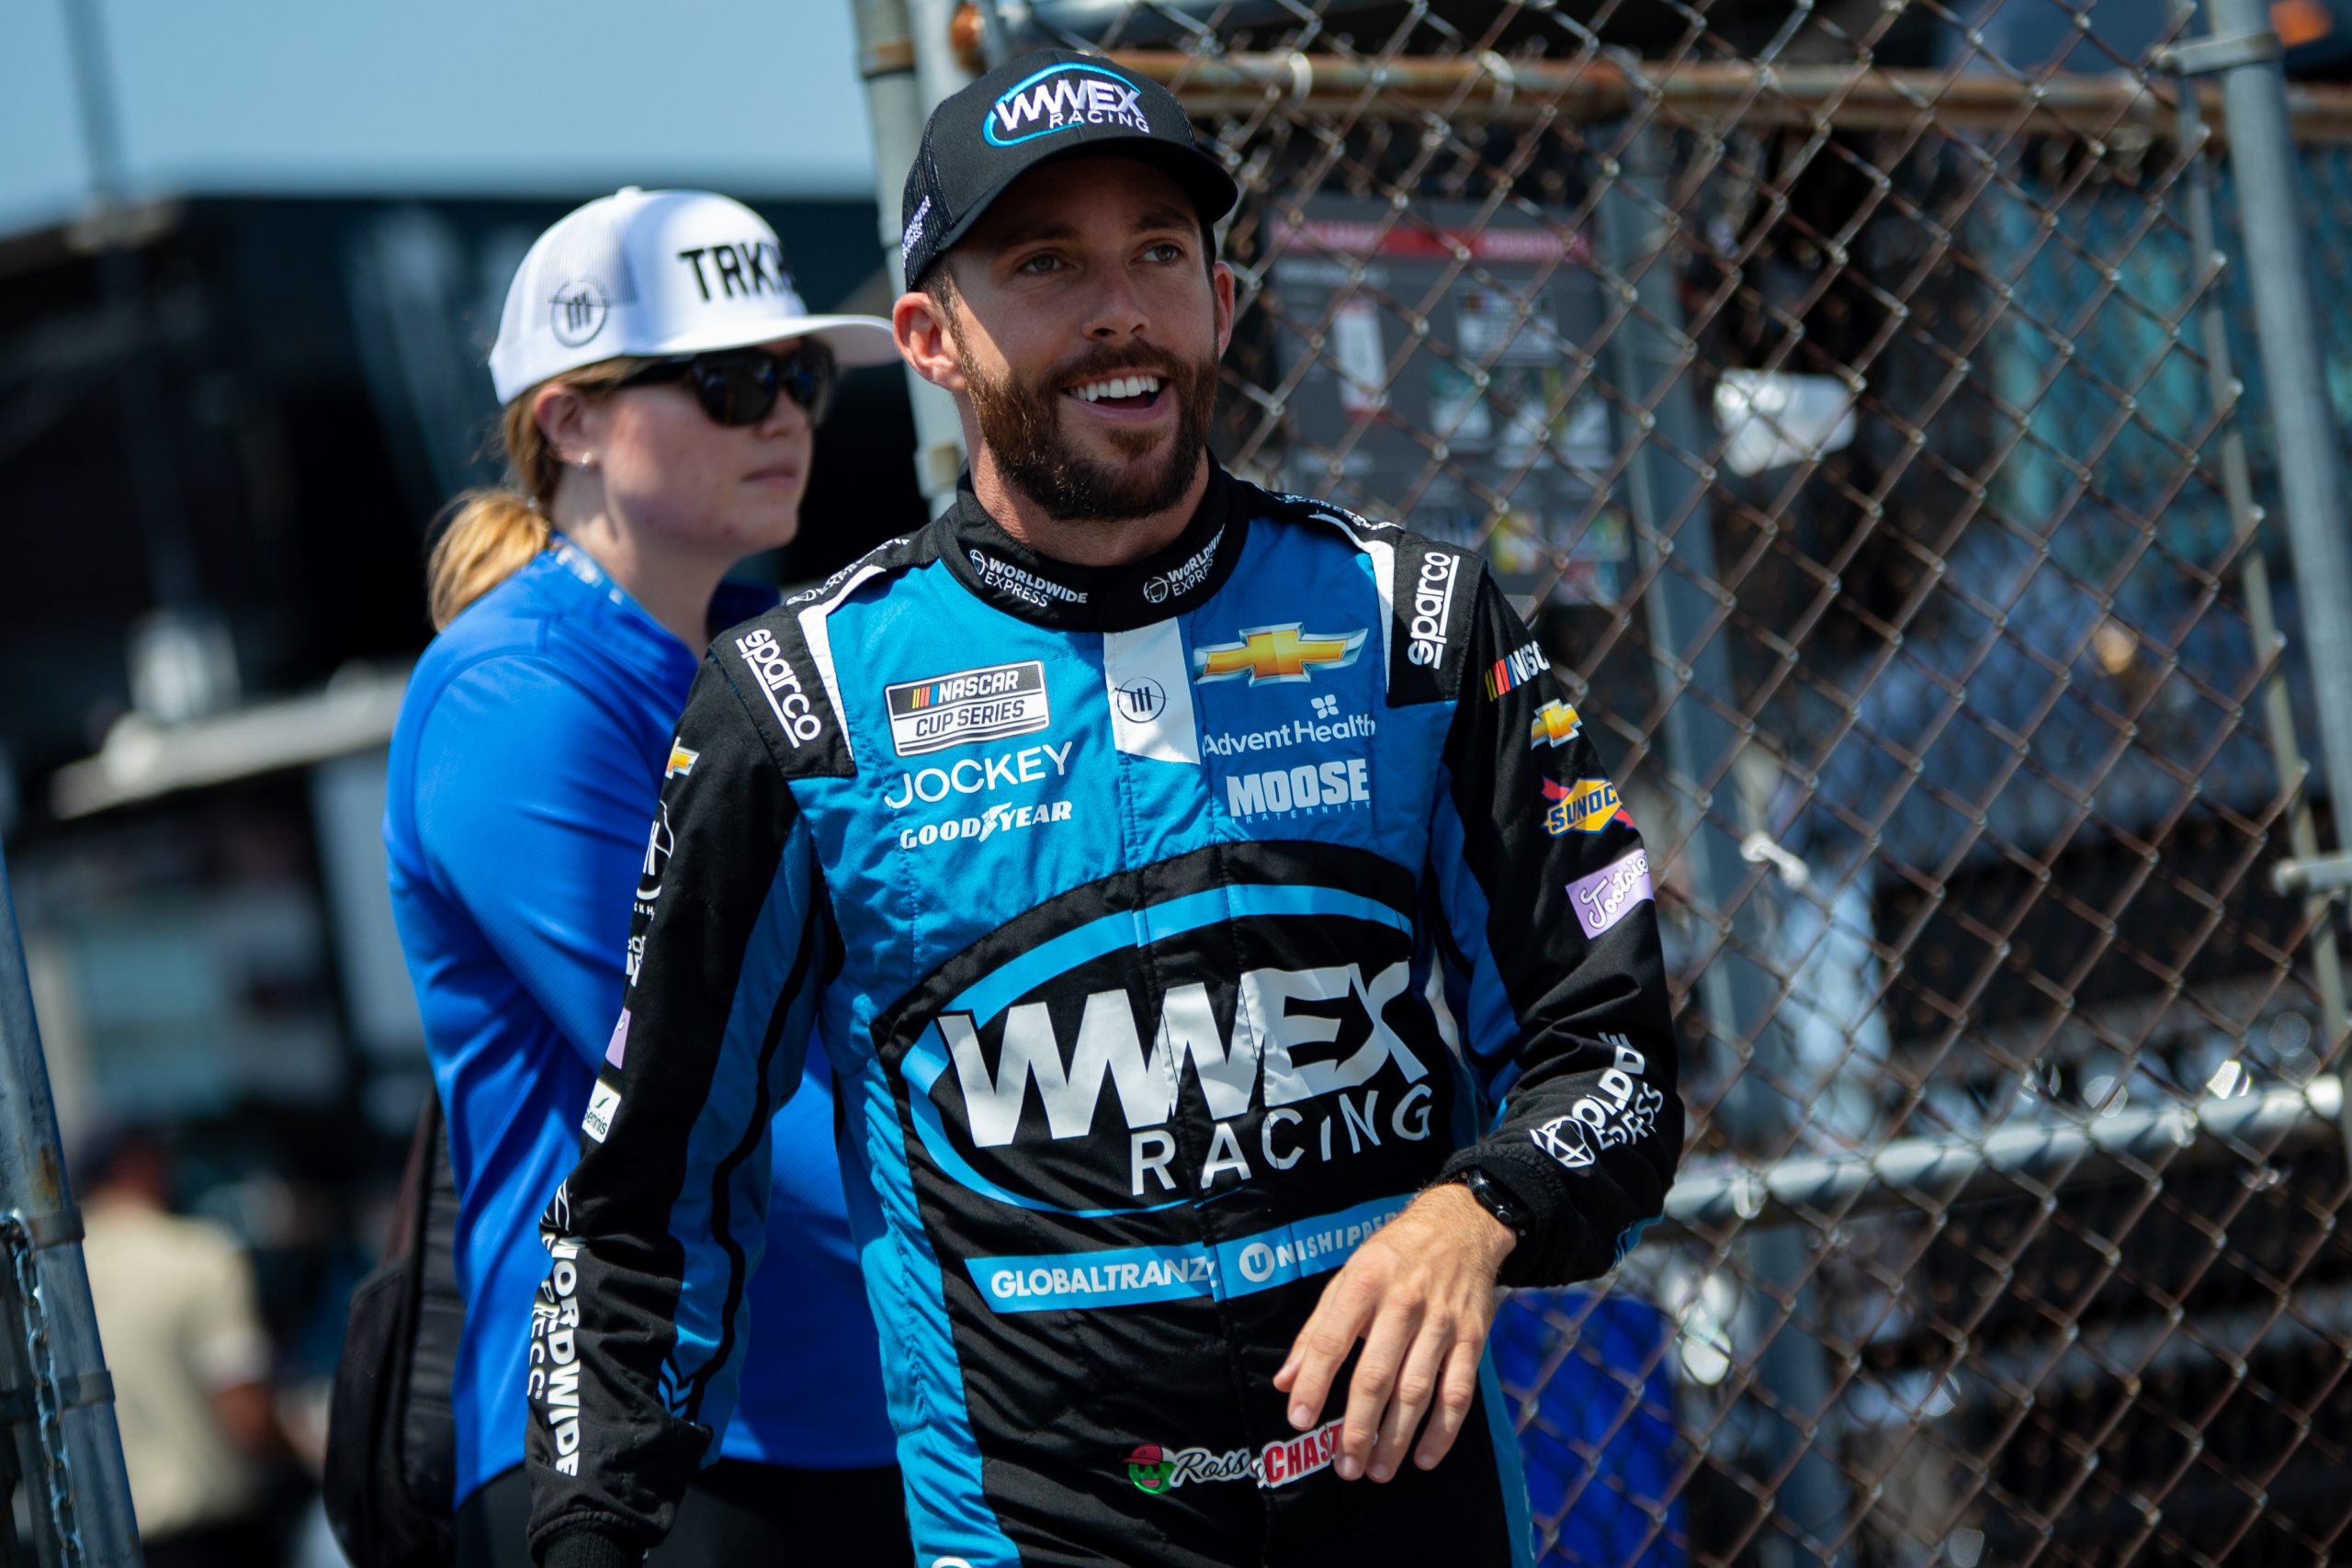 Can Ross Chastain tally a timely victory at Homestead-Miami? (Photo: Sam Draiss | The Podium Finish)